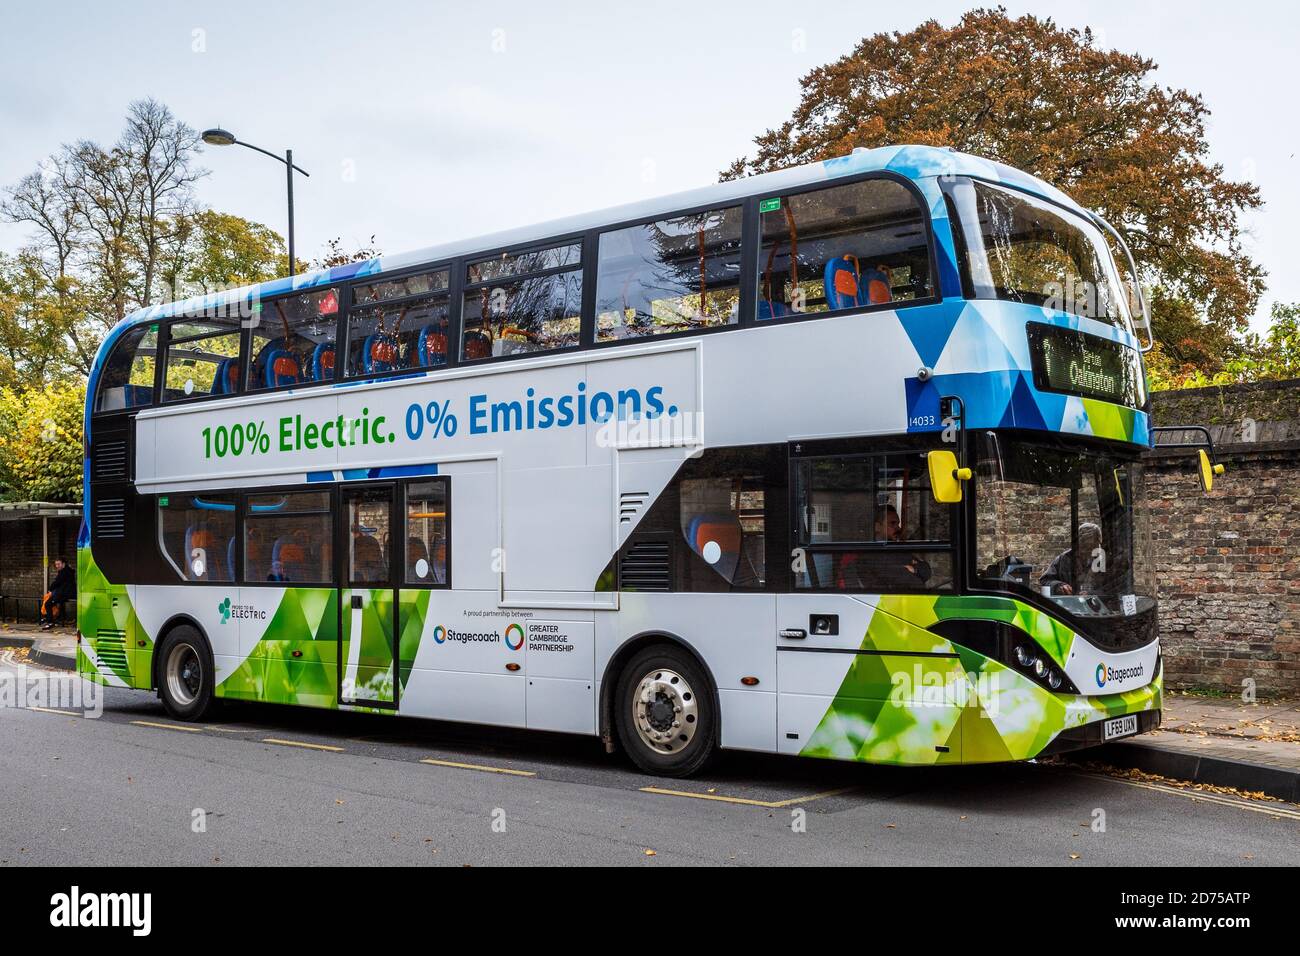 Electric Double Decker Bus in Cambridge UK. 100% Electric double deck bus operated by Stagecoach. Zero Emission - 8 hr charge time for 160 mile range. Stock Photo